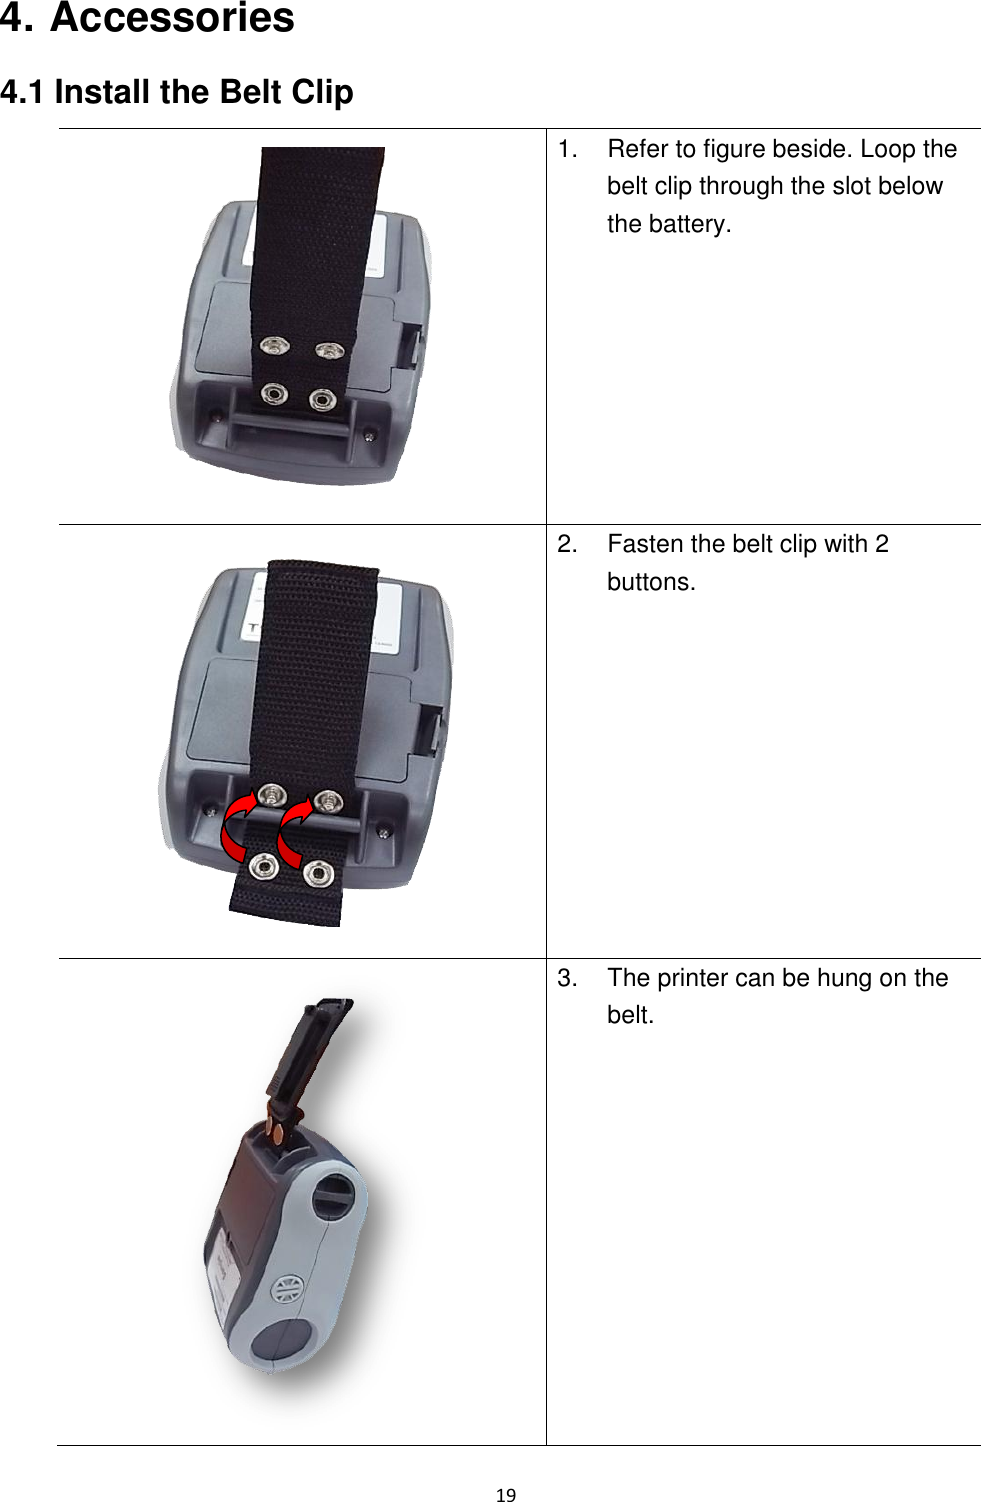 19  4. Accessories 4.1 Install the Belt Clip  1.  Refer to figure beside. Loop the belt clip through the slot below the battery.  2.  Fasten the belt clip with 2 buttons.  3.  The printer can be hung on the belt.  